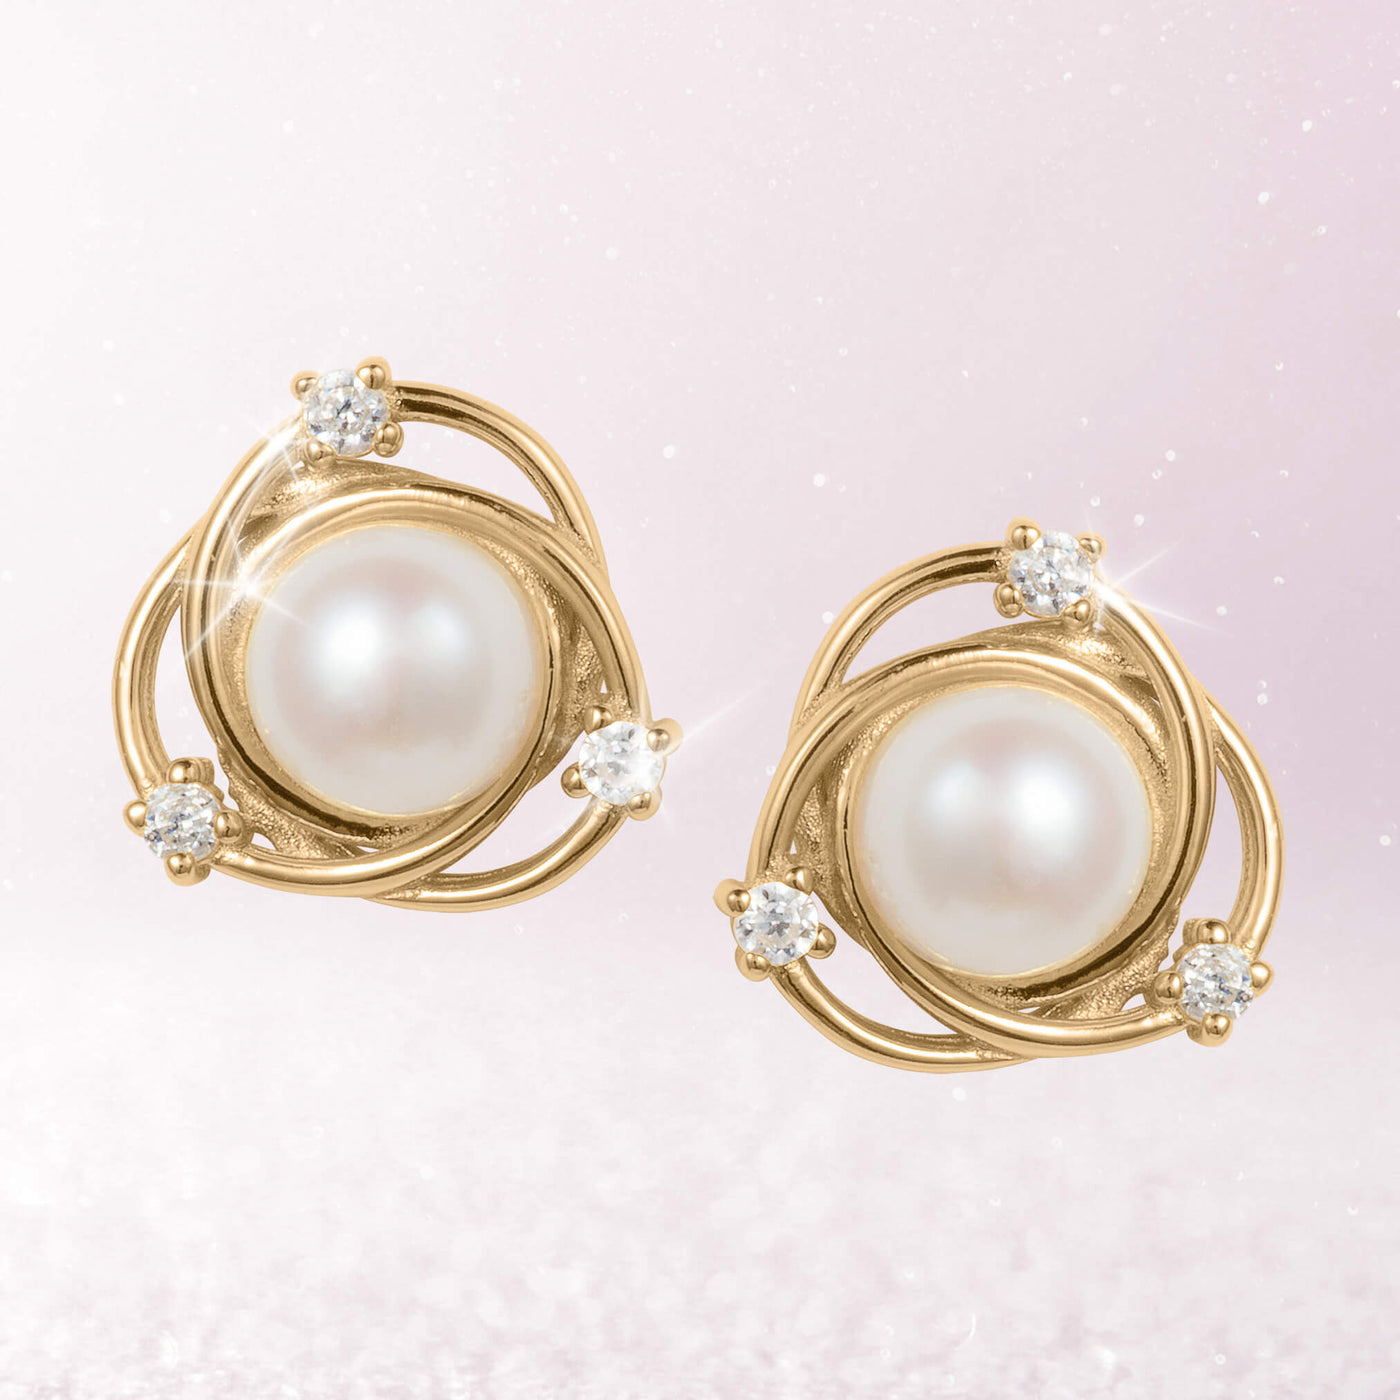 Daniel Steiger Pearl Serenity Collection